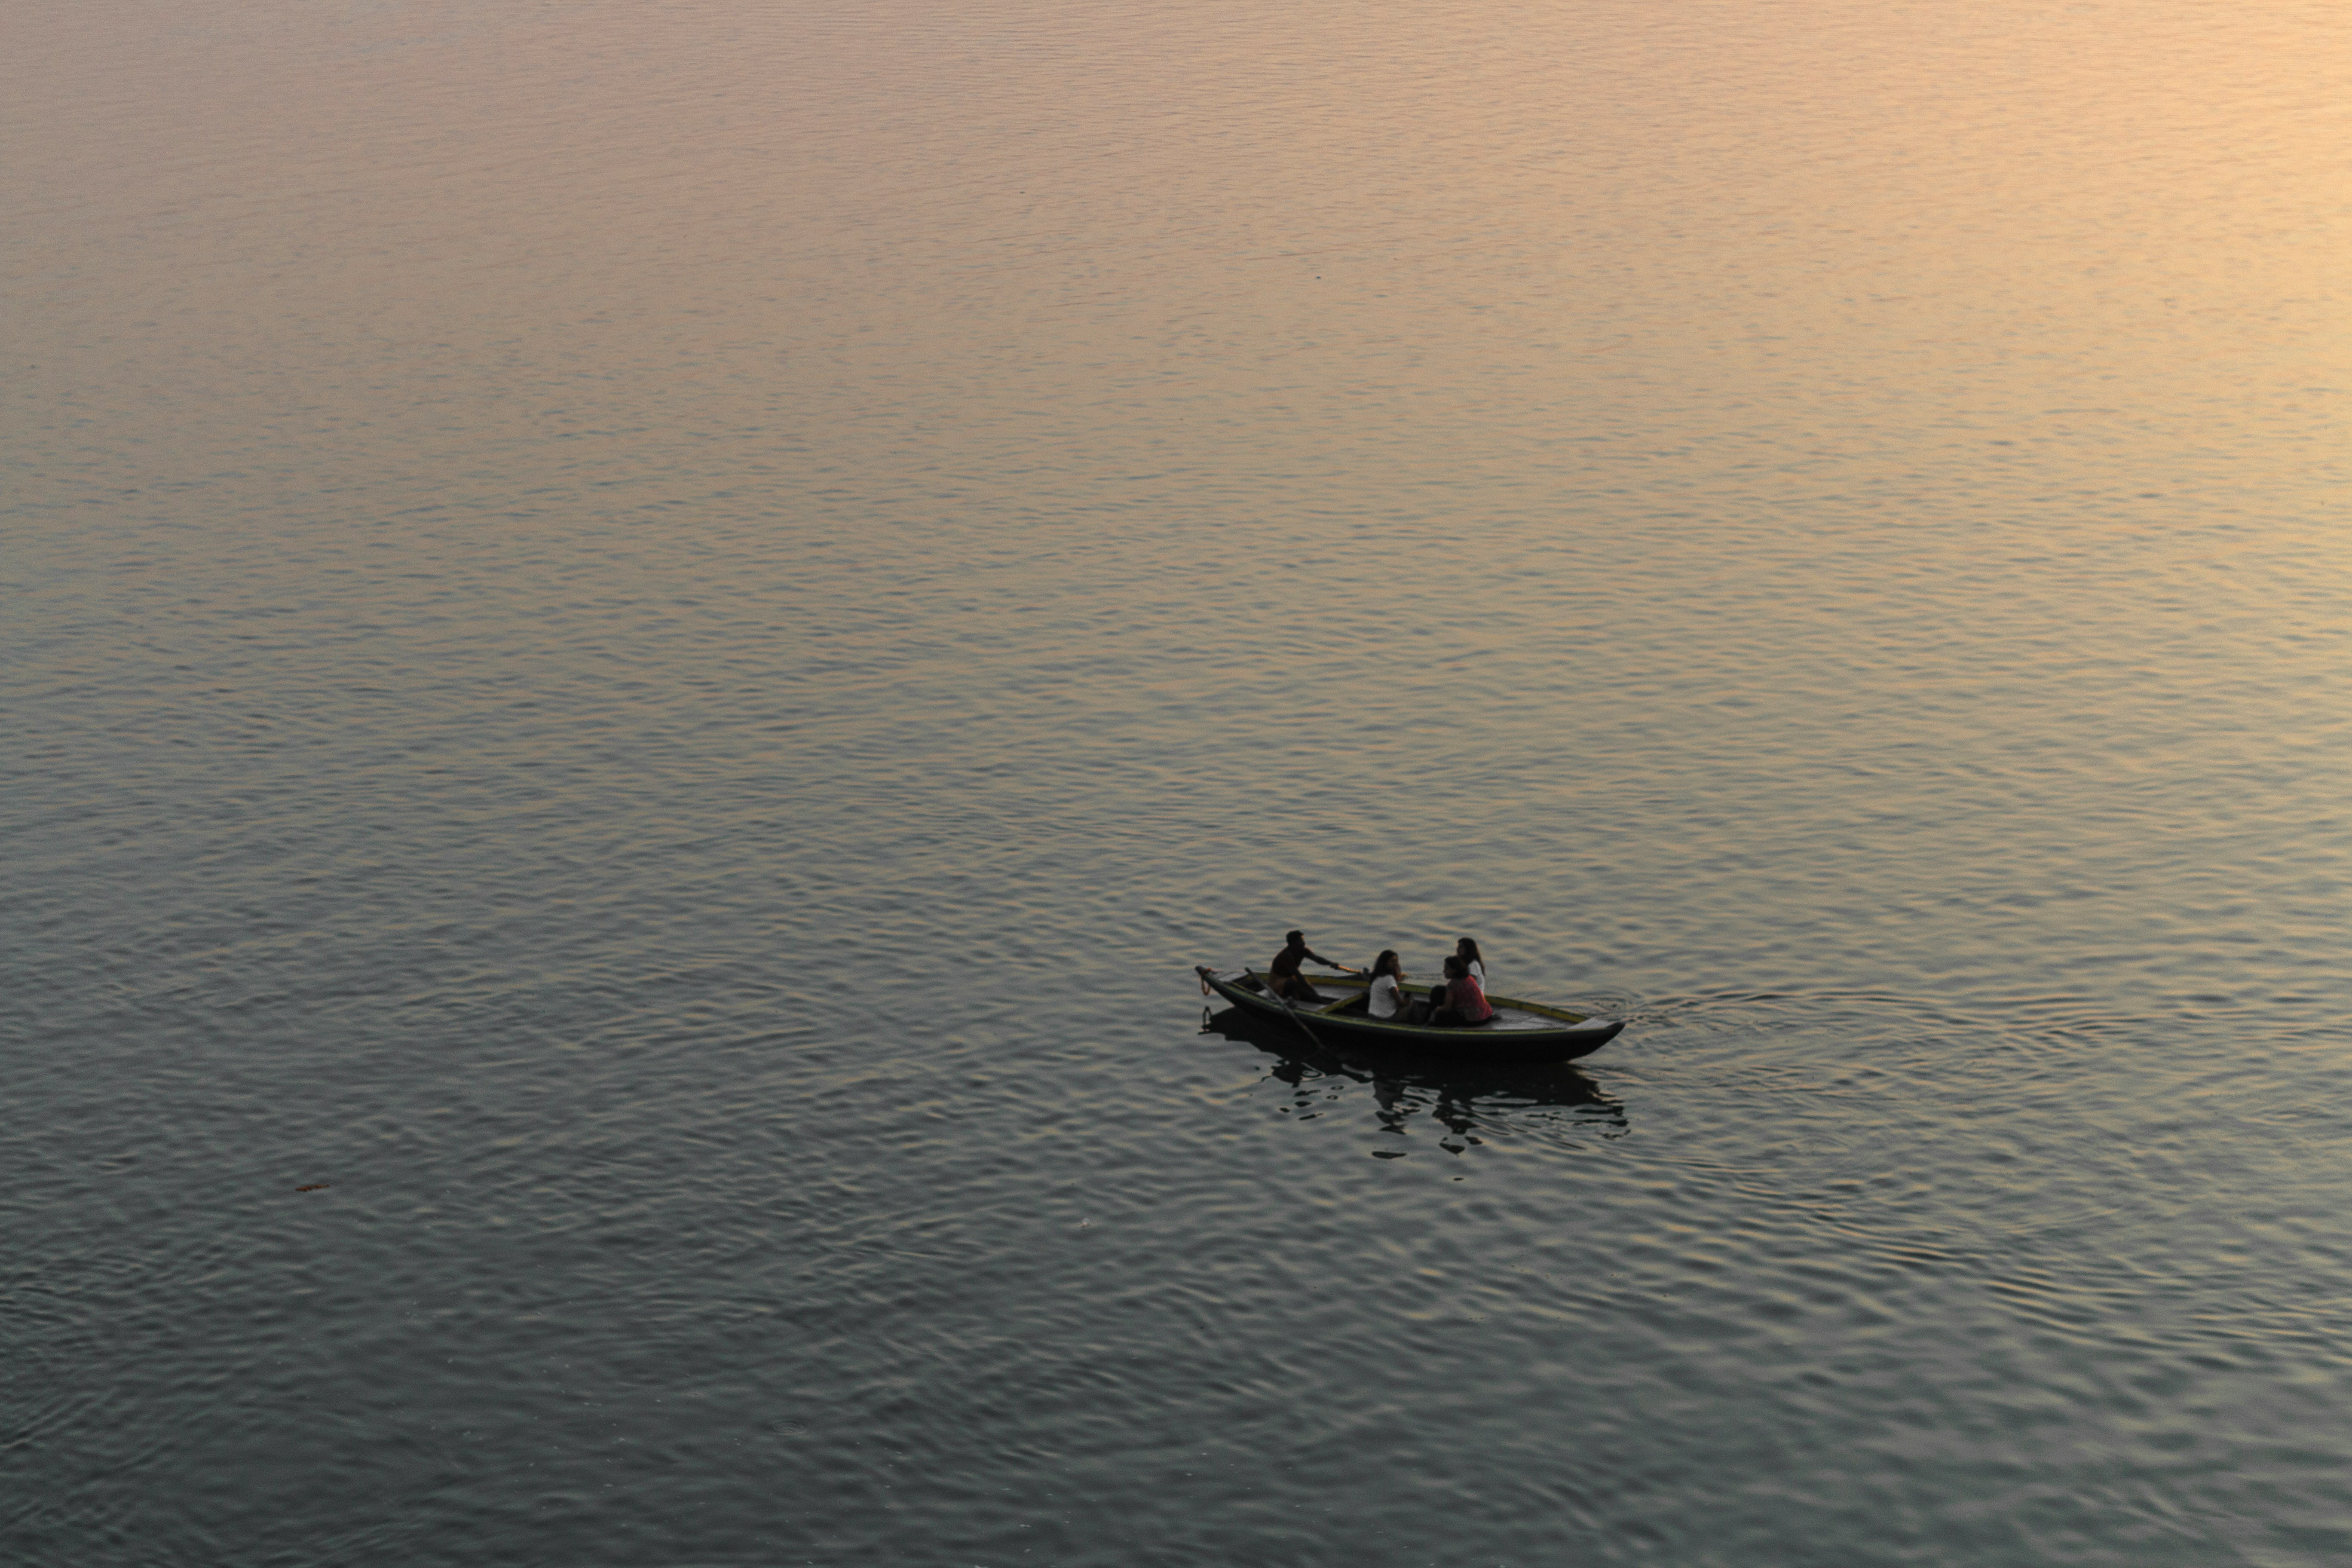 three person riding on boat surrounded by water during golden hour